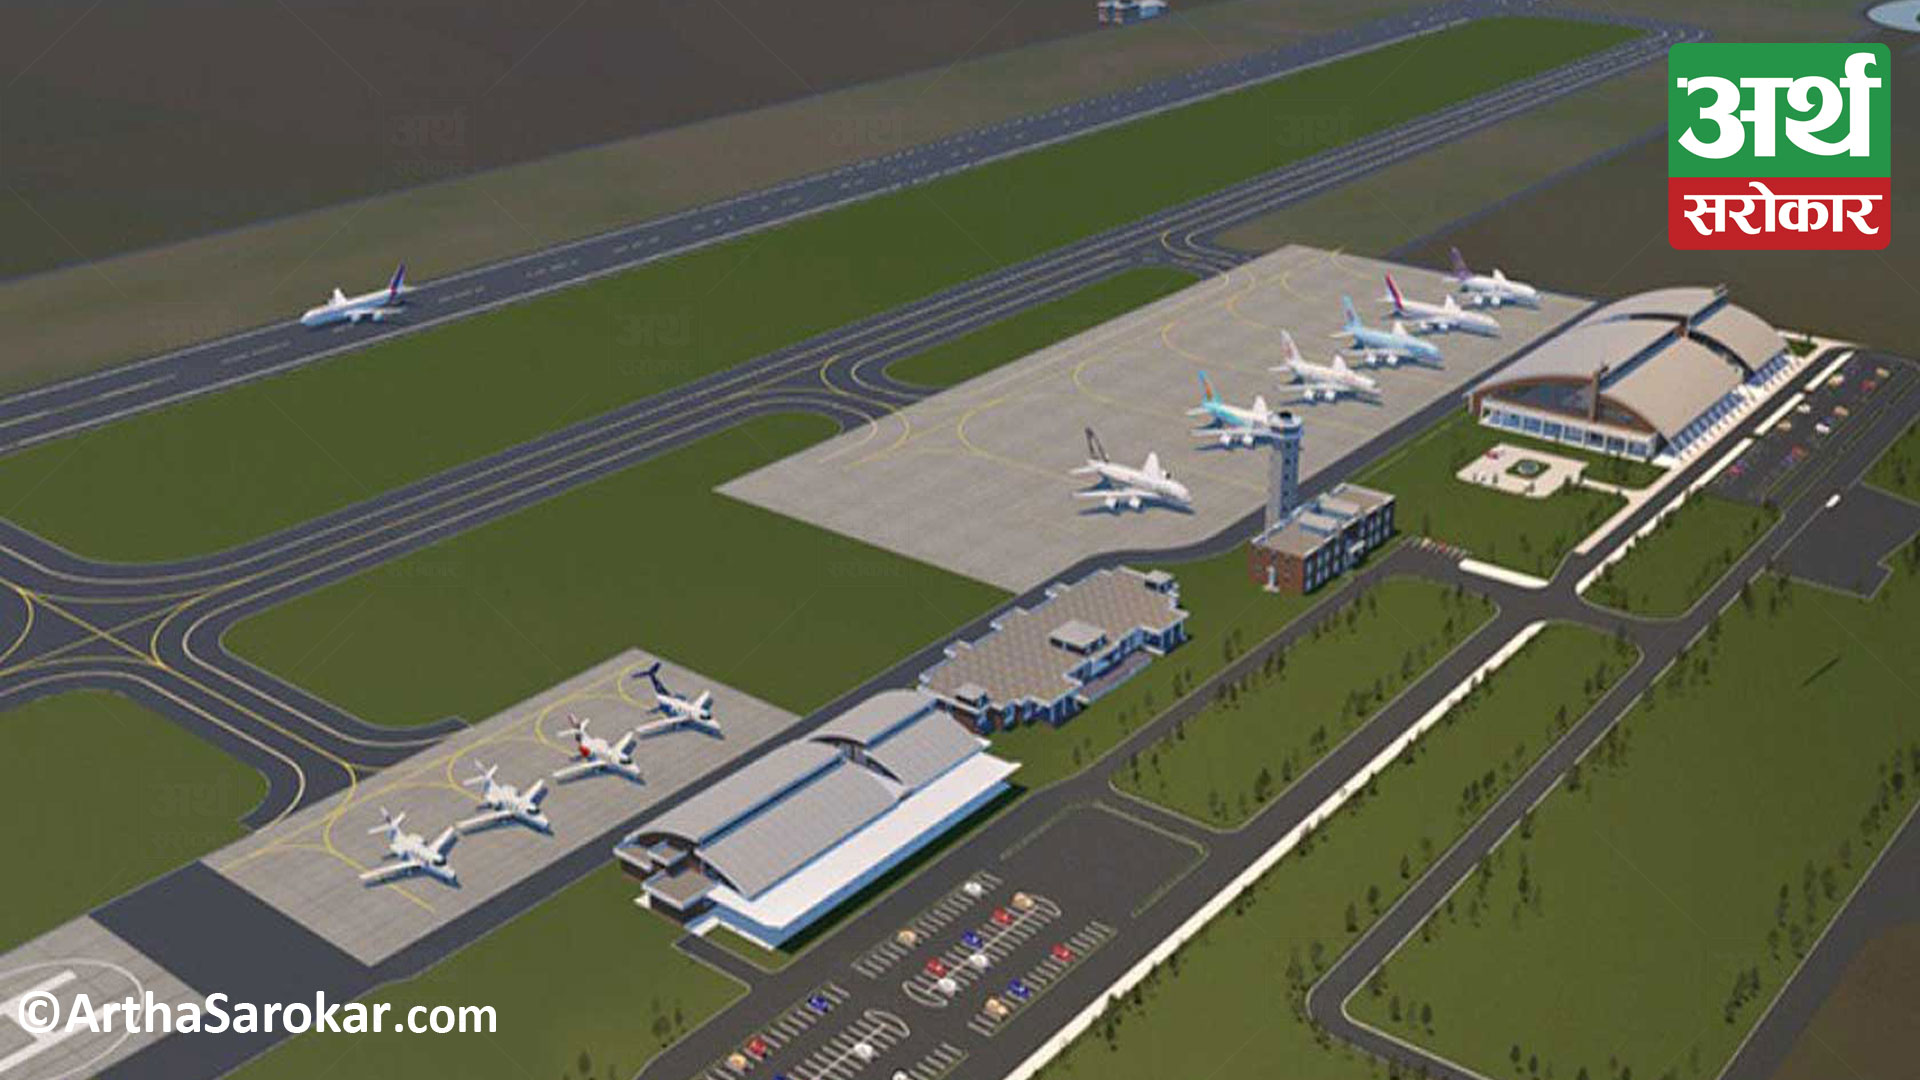 New runway in Gautam Buddha Int’l Airport to be operational from April 21